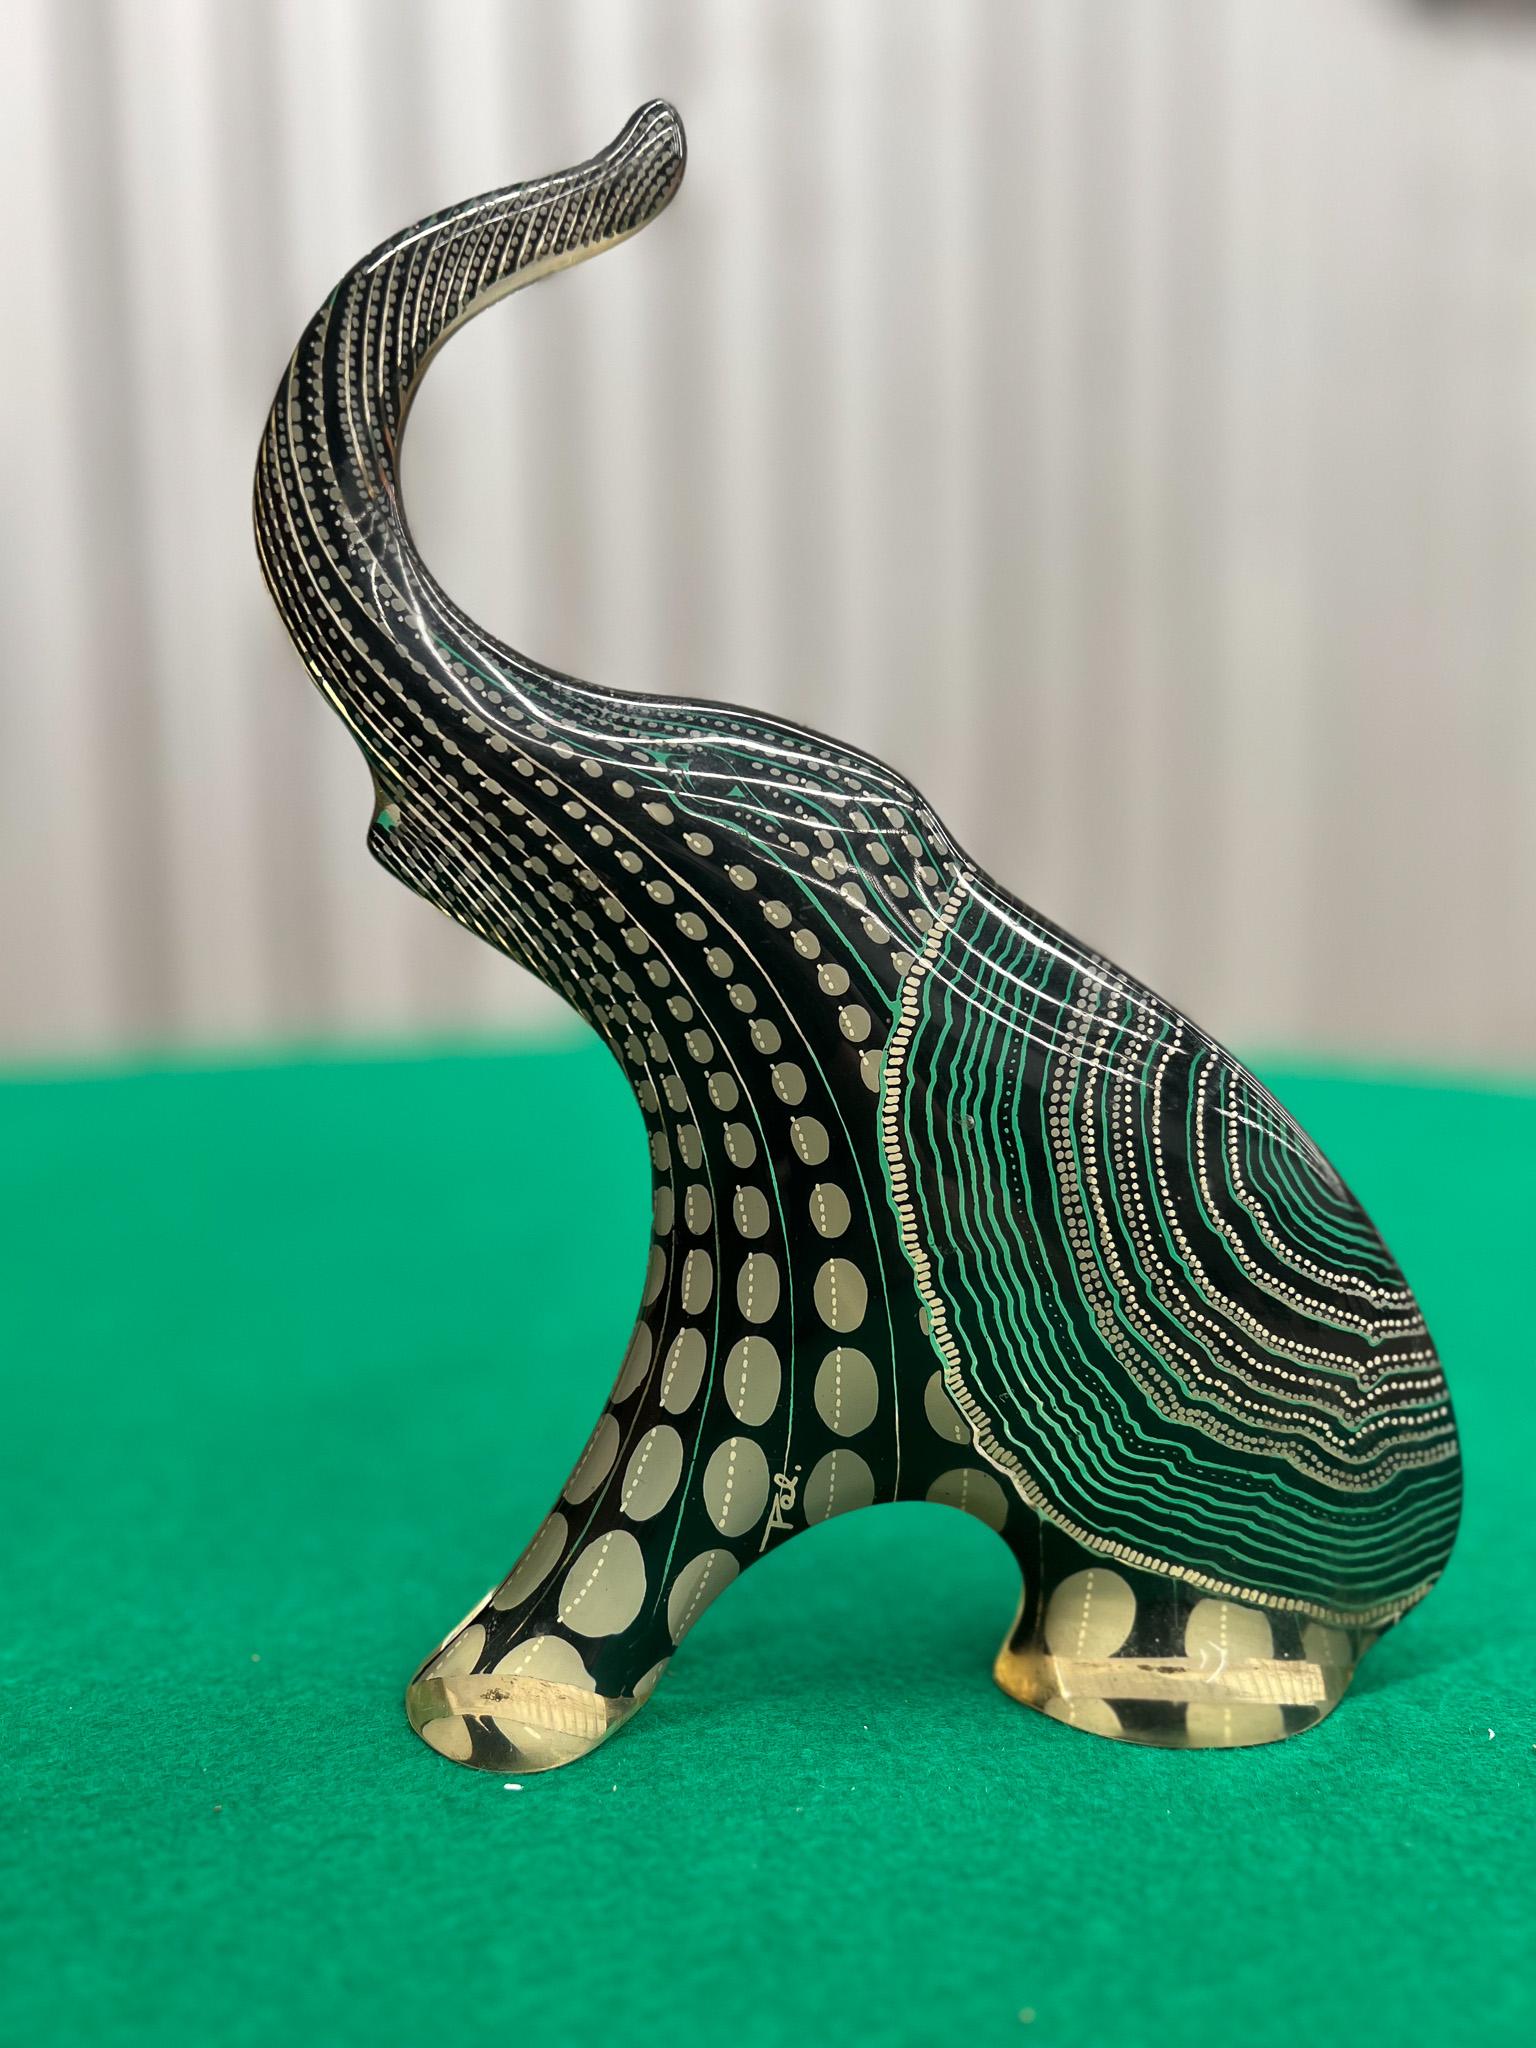 This Brazilian modern sculpture of an elephant was designed by Abraham Palatinik in the 1960s. It is part of the Artemis collection that features several different animals, each with sleek, flat silhouettes. Original label on the bottom of the